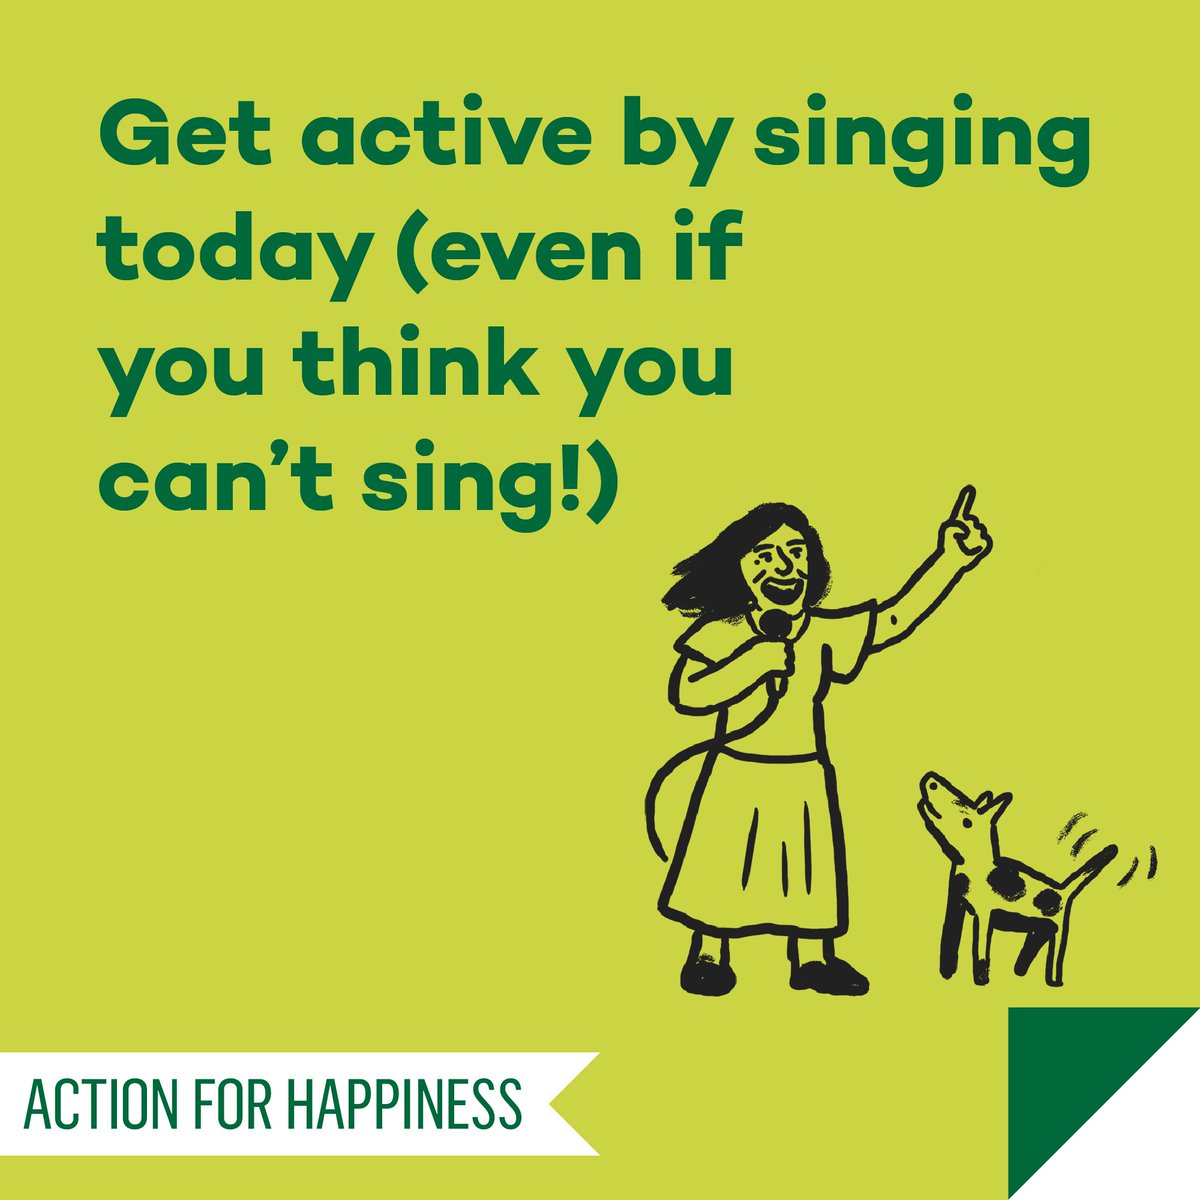 Active April - Day 15: Get active by singing today (even if you think you can’t sing!) actionforhappiness.org/active-april #ActiveApril